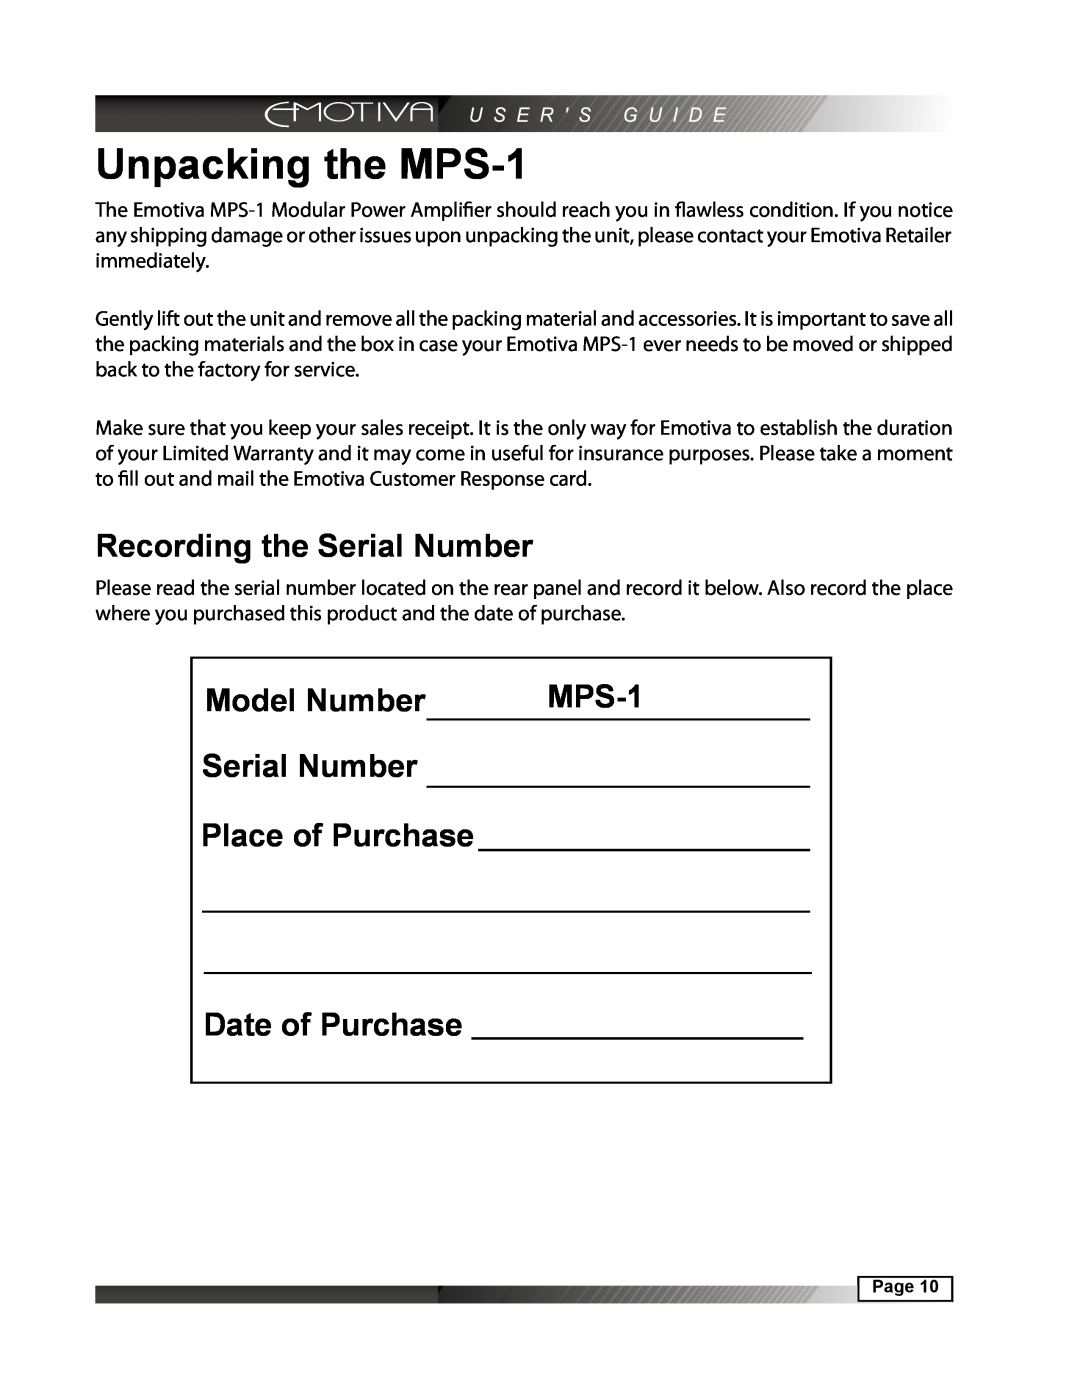 Emotiva manual Unpacking the MPS-1, Recording the Serial Number, Place of Purchase, Date of Purchase, Model Number 